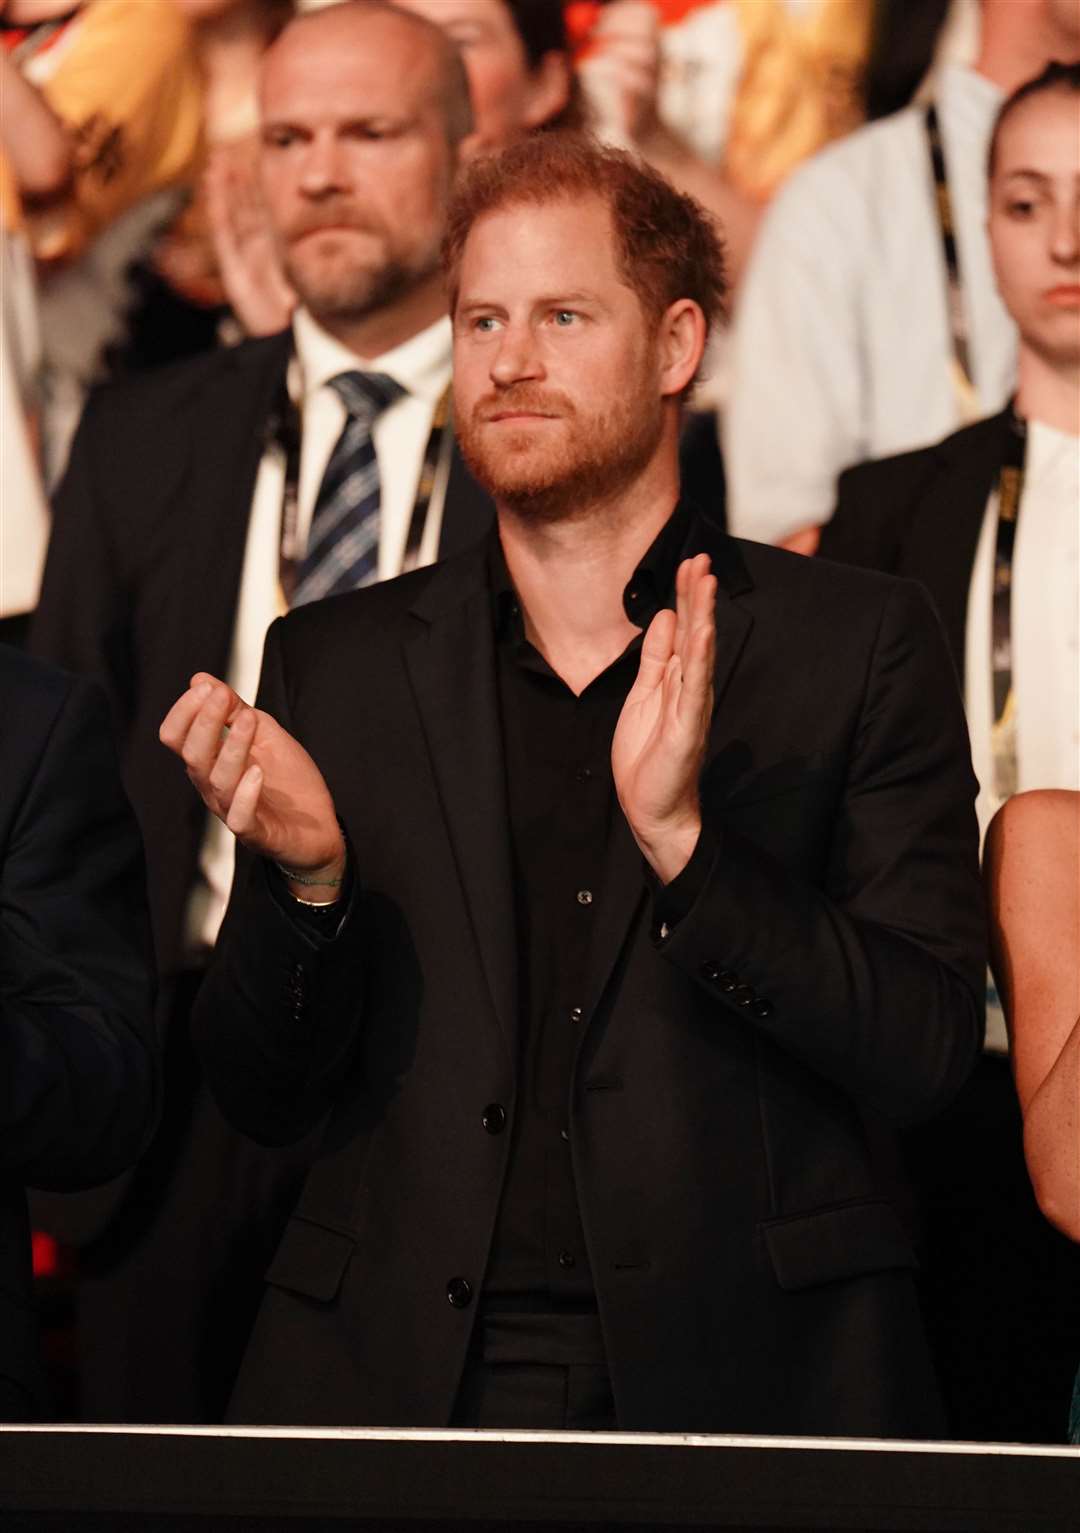 The Duke of Sussex is reportedly in Texas with his wife (Jordan Pettitt/PA)